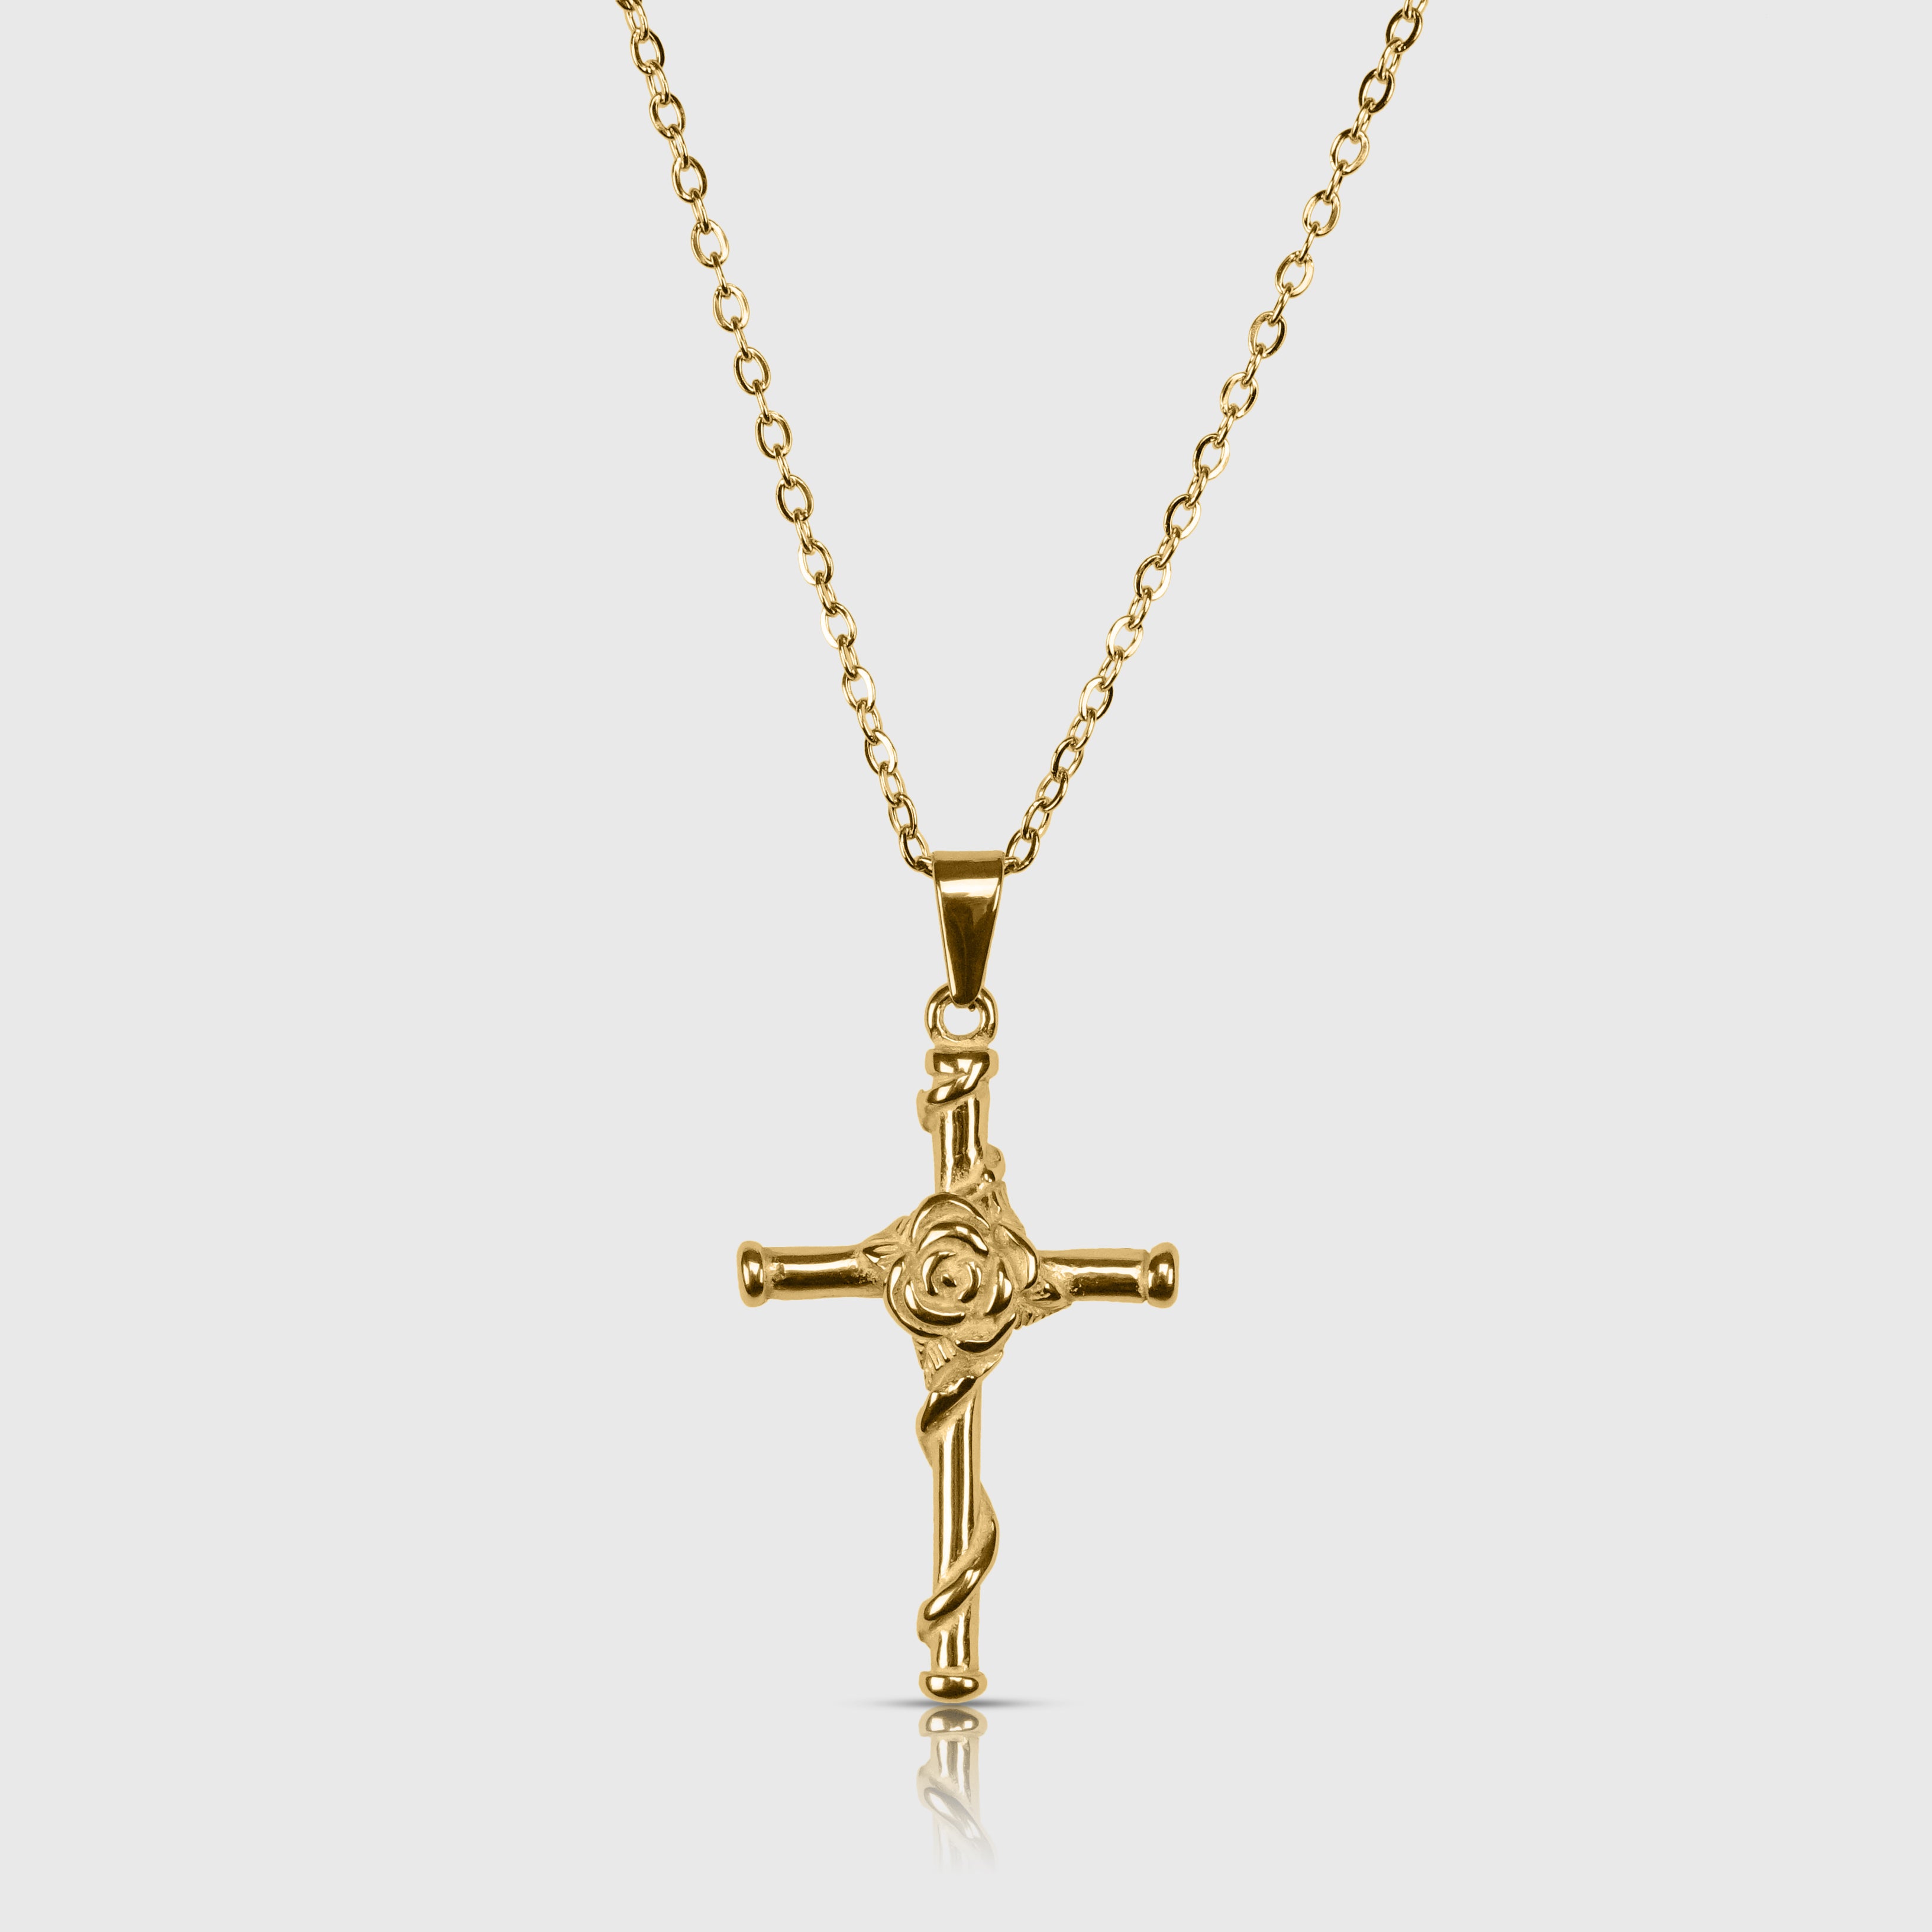 ROSE CROSS NECKLACE - GOLD TONE